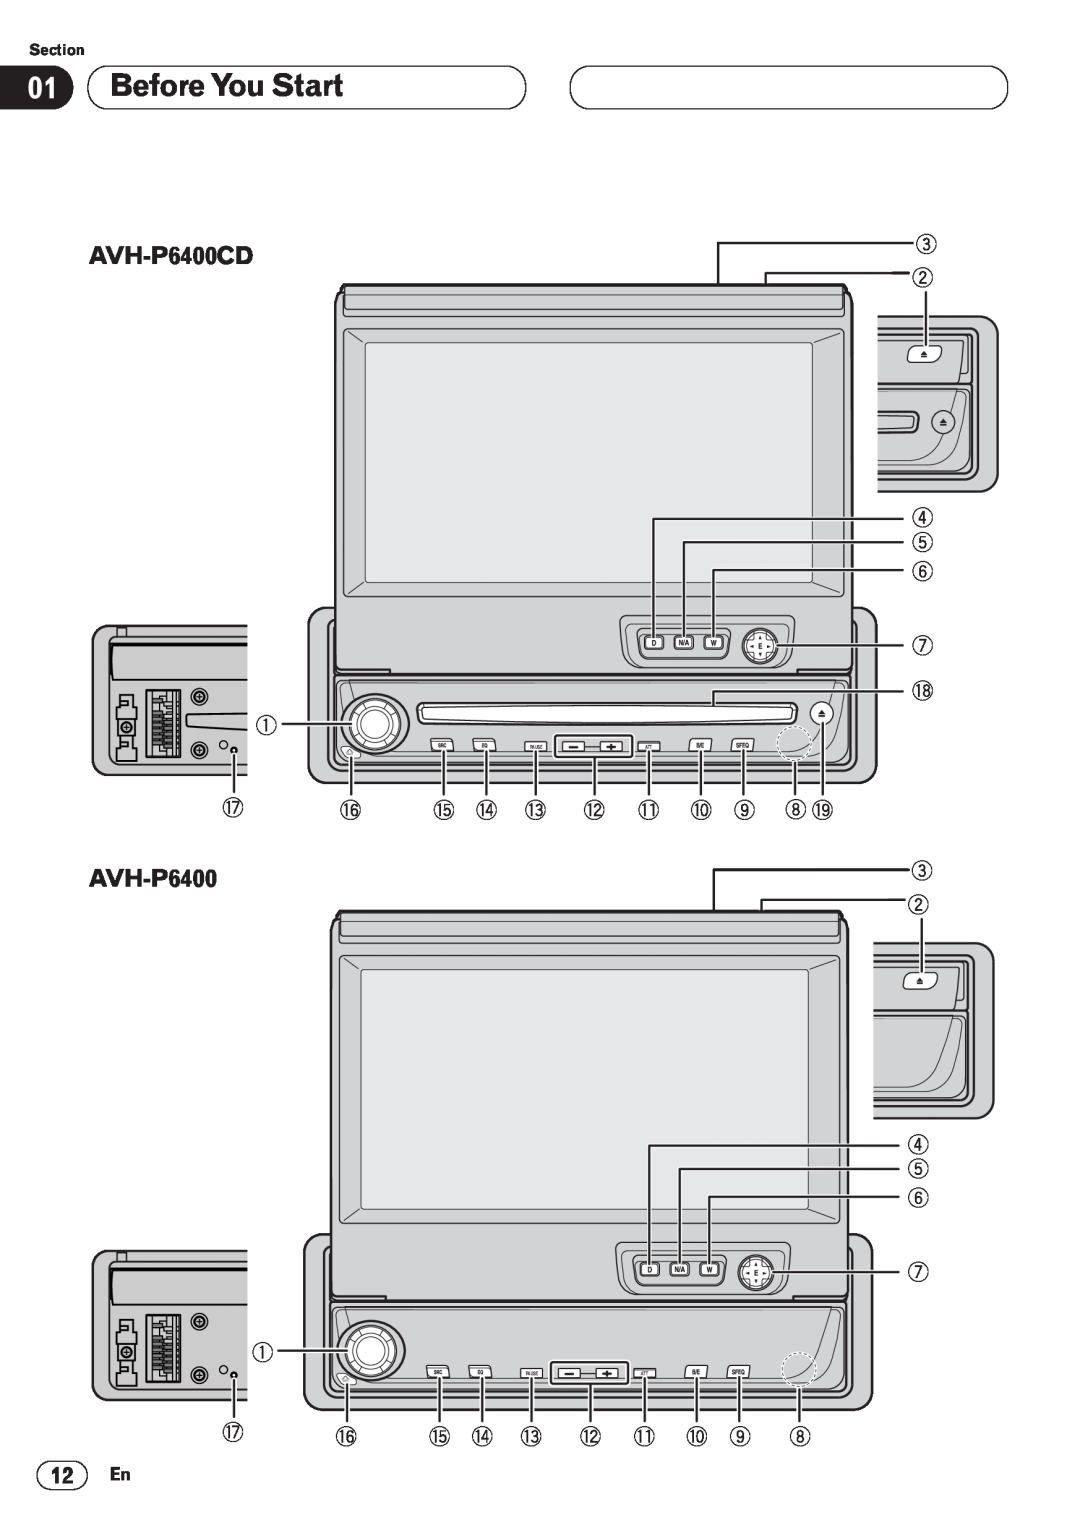 Pioneer operation manual Before You Start, AVH-P6400CD, 12 En, Section, Pause 